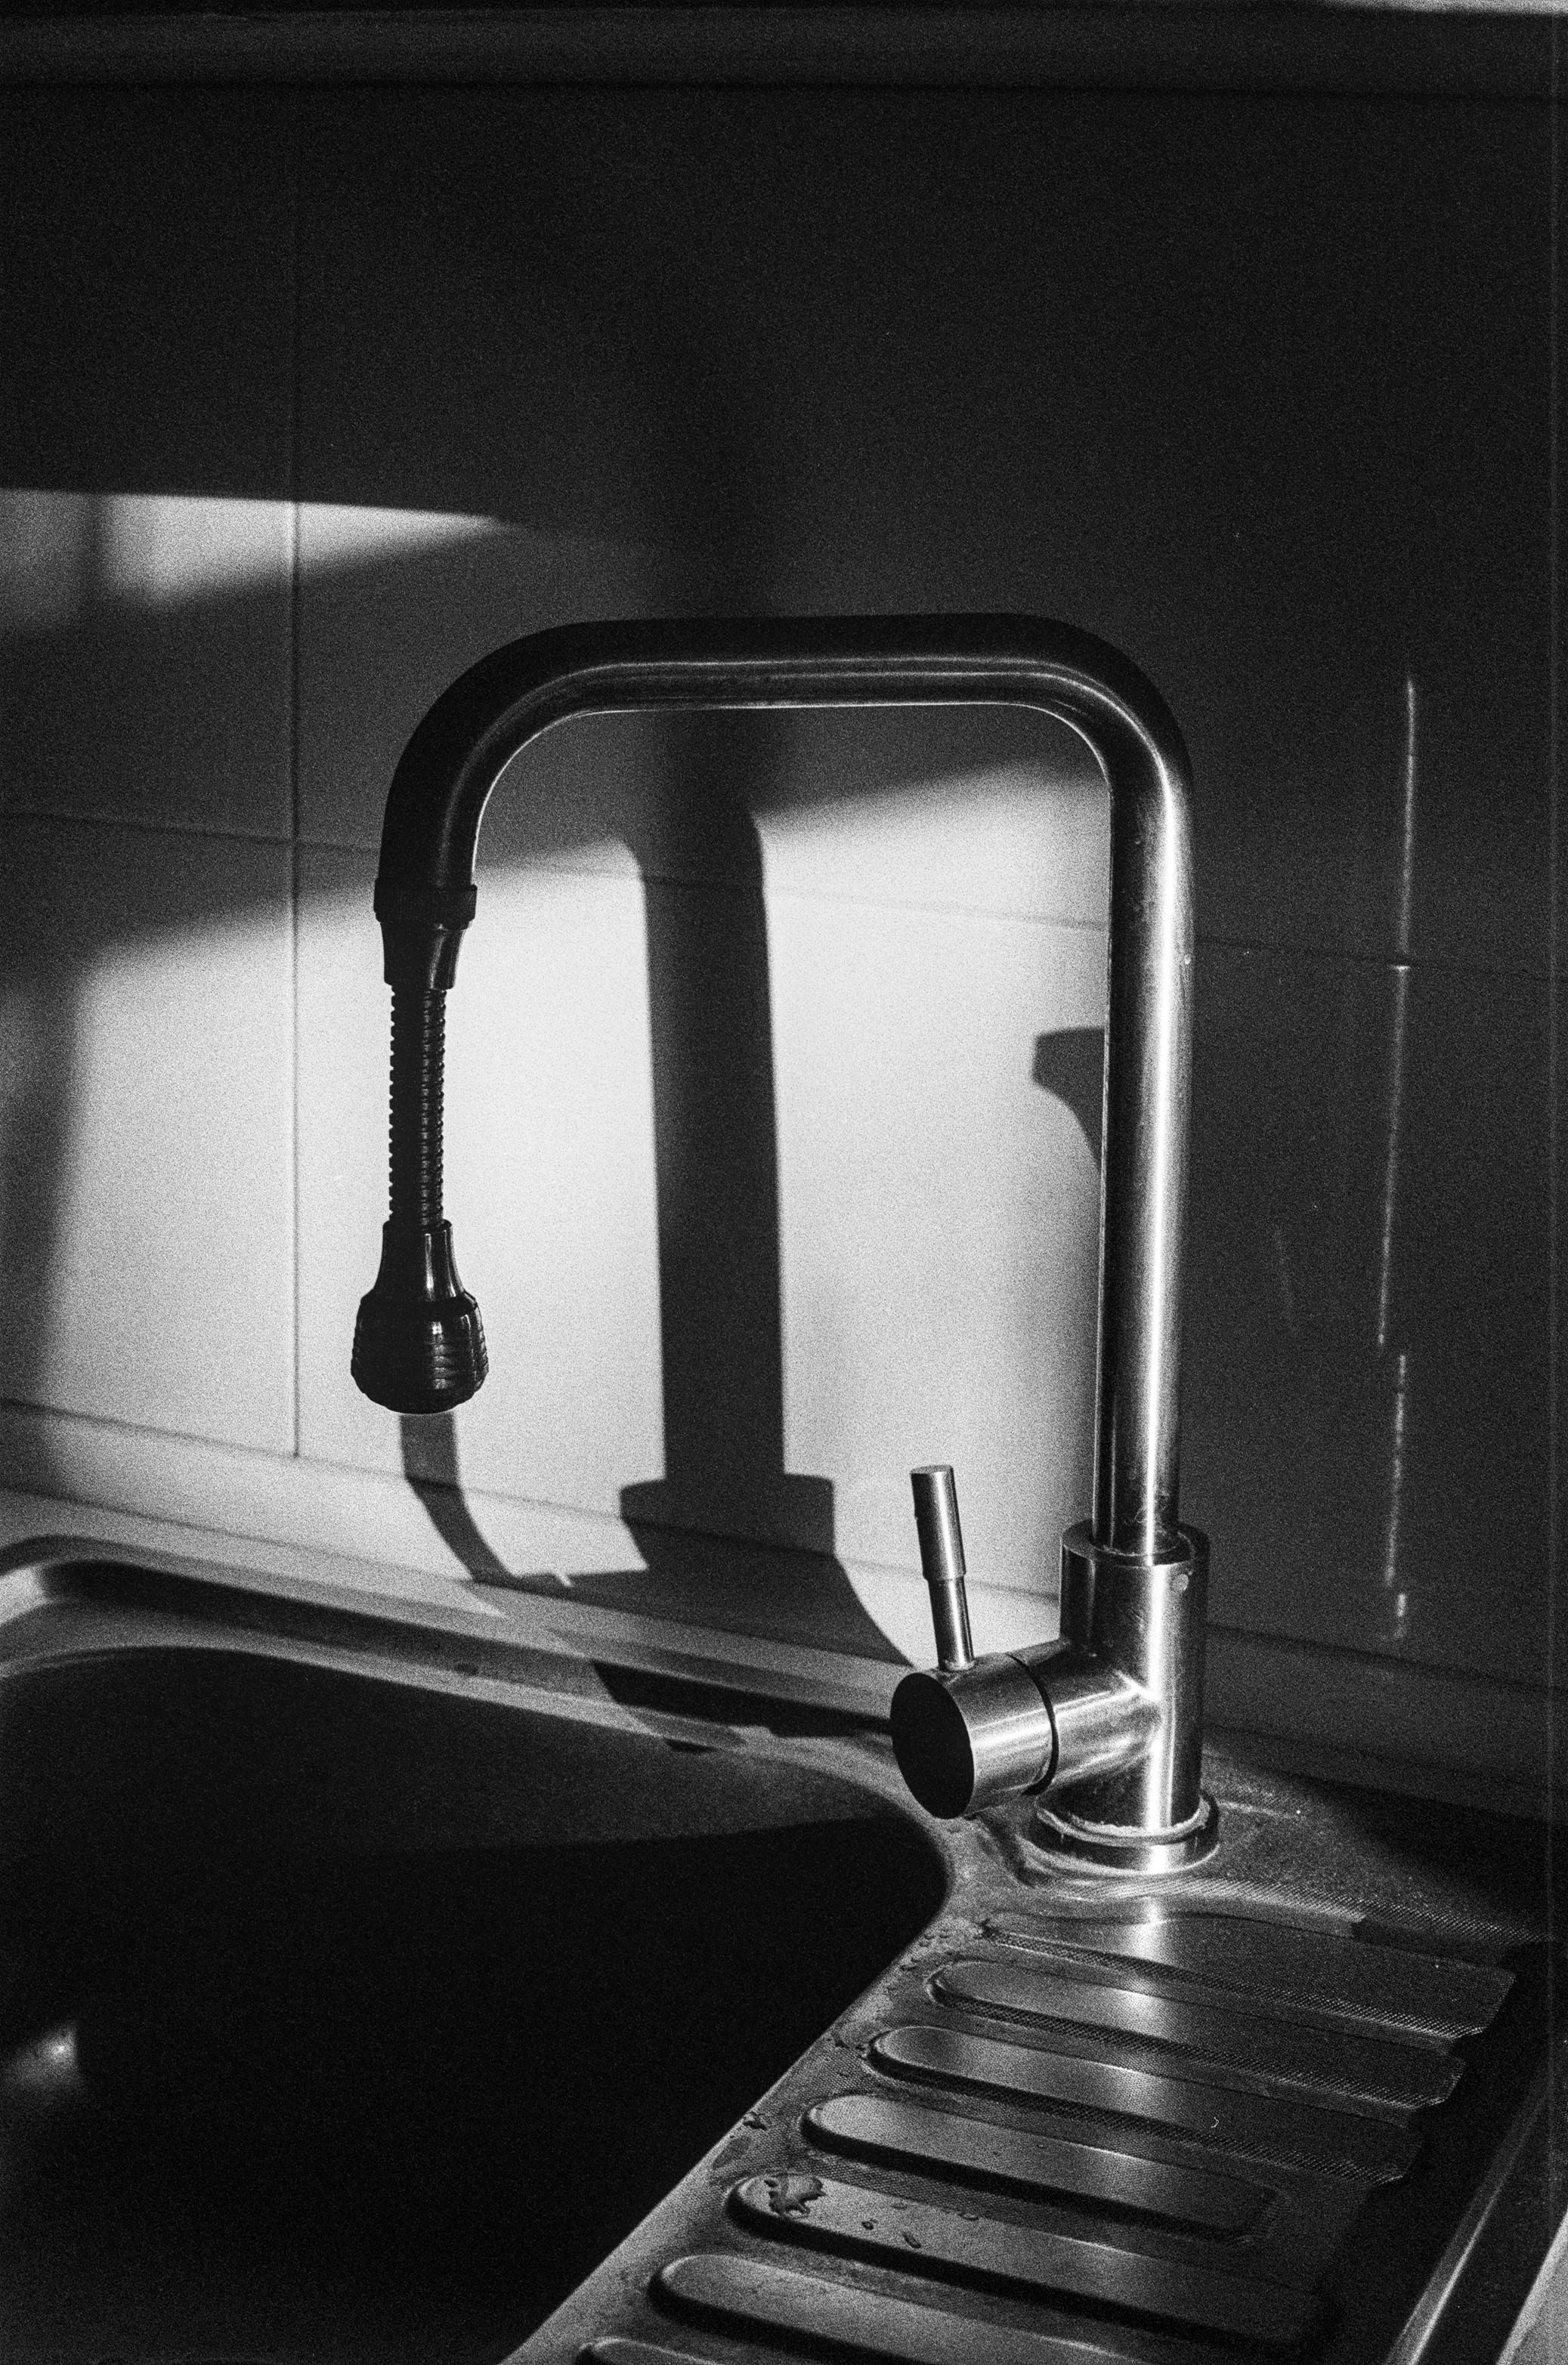 The image shows a black and white photo of a kitchen sink with a faucet on it. The sink is made of metal. It has a single basin and a drainboard. The faucet is also made of metal. The kitchen faucet is tall. It is lit by the sun and casts a shadow on the wall